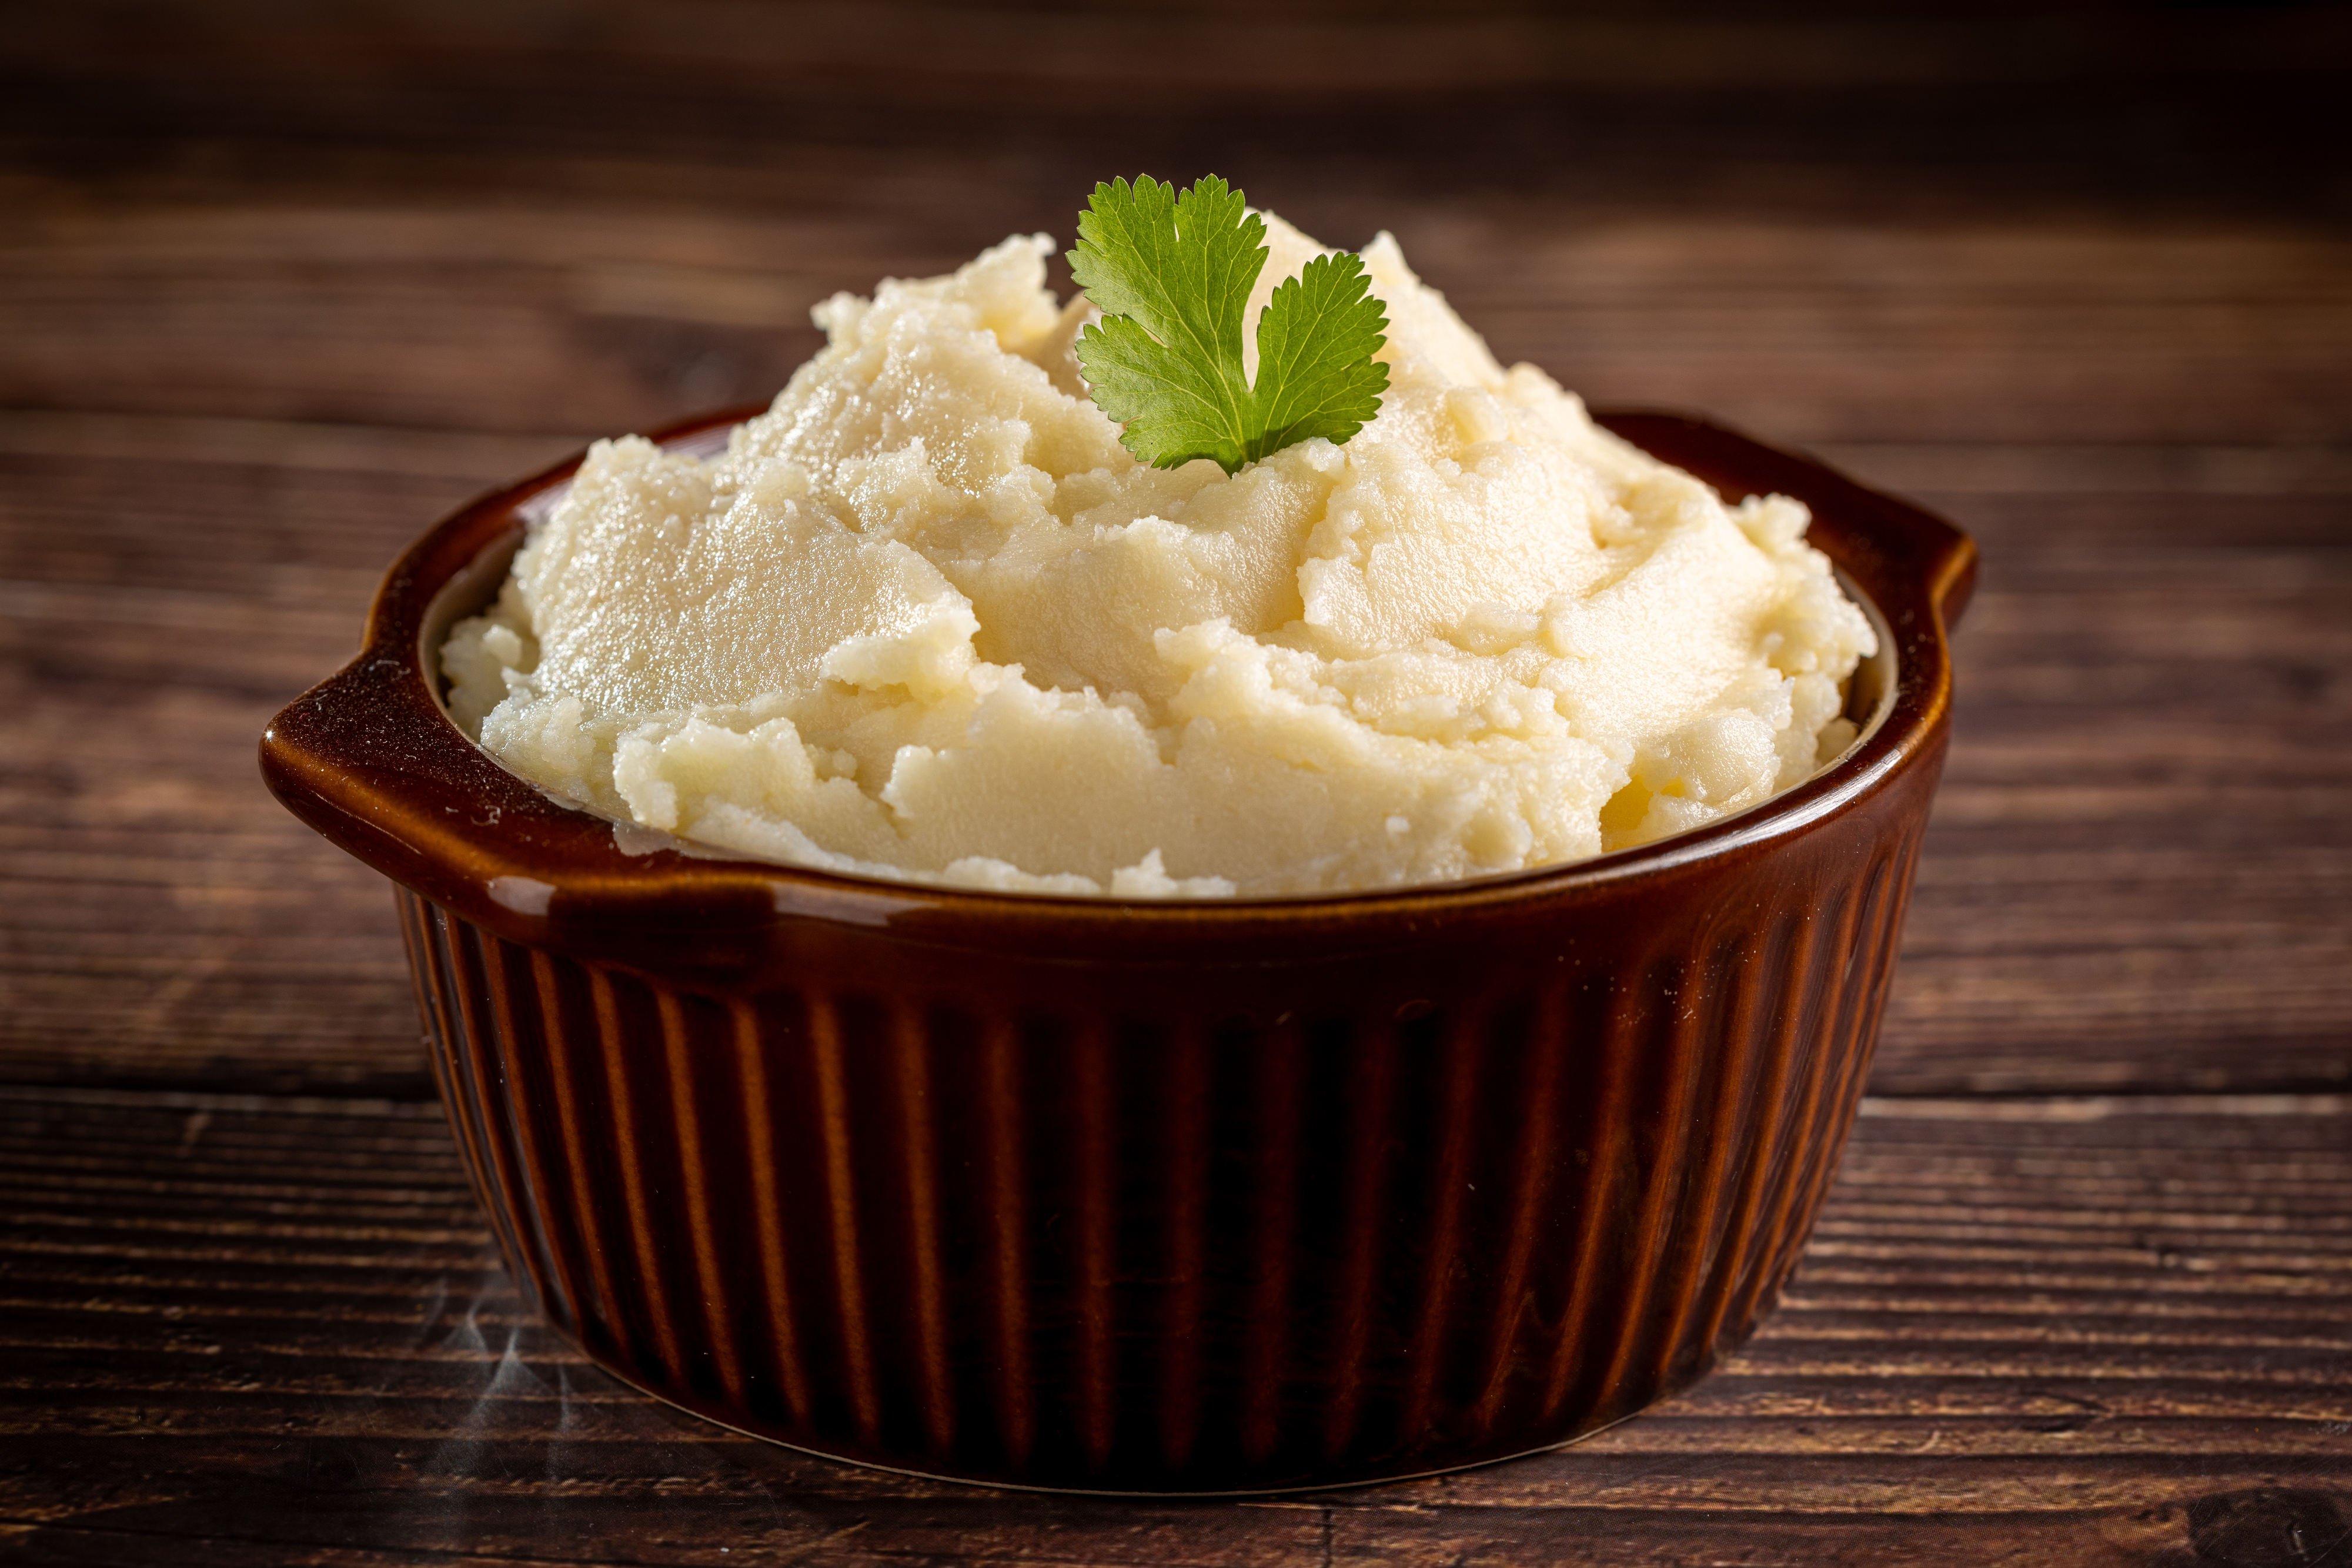 A small bowl of mashed potatoes